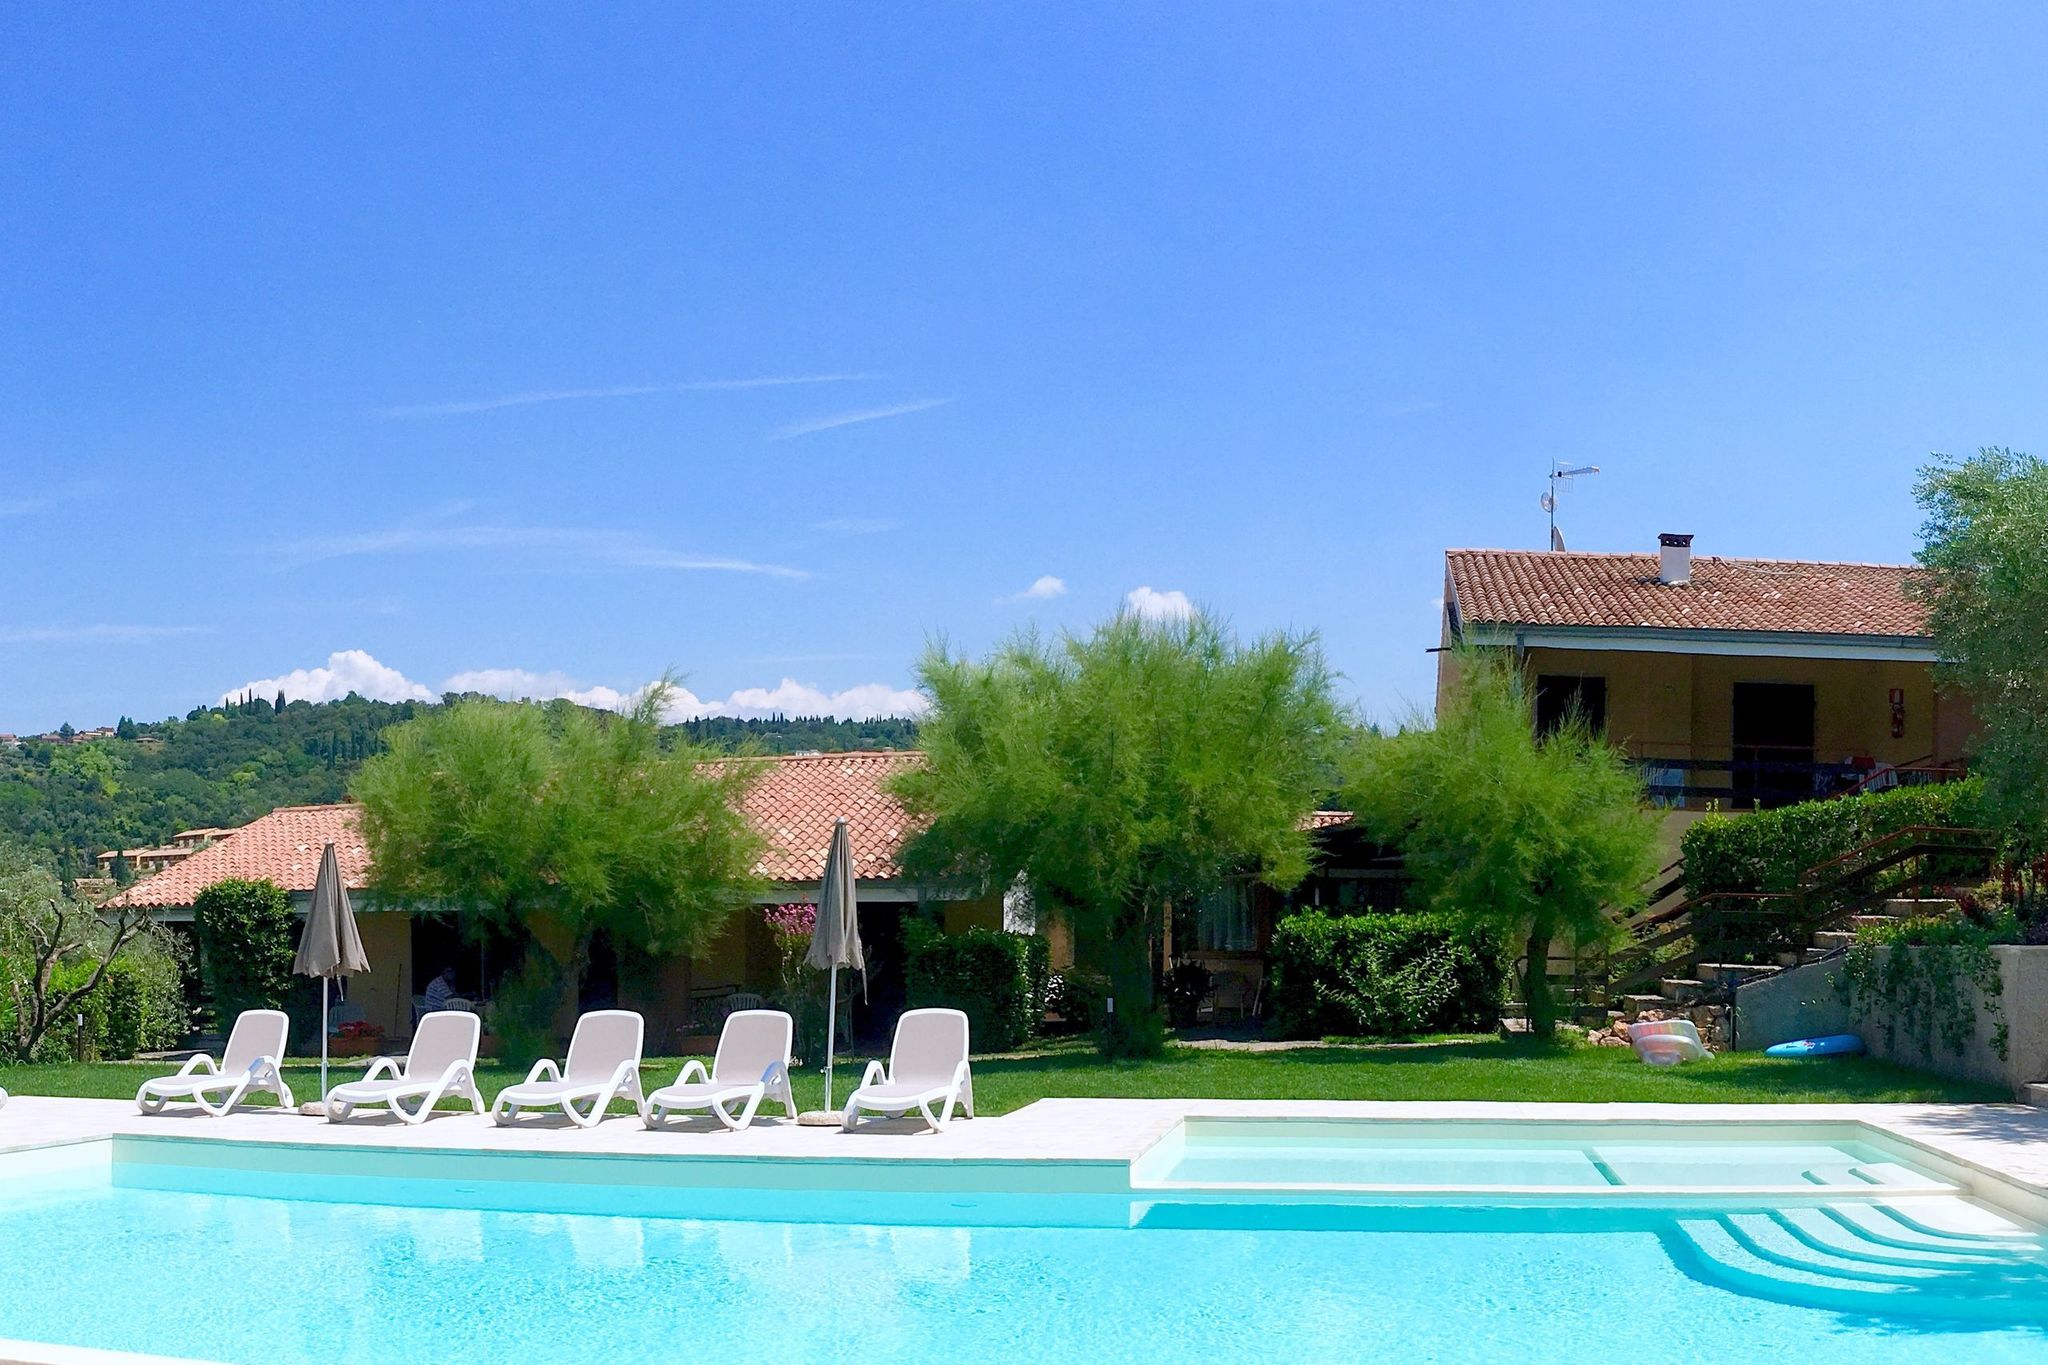 Comfortable flat with garden and swimming pool, only 1.5 km from Lake Garda